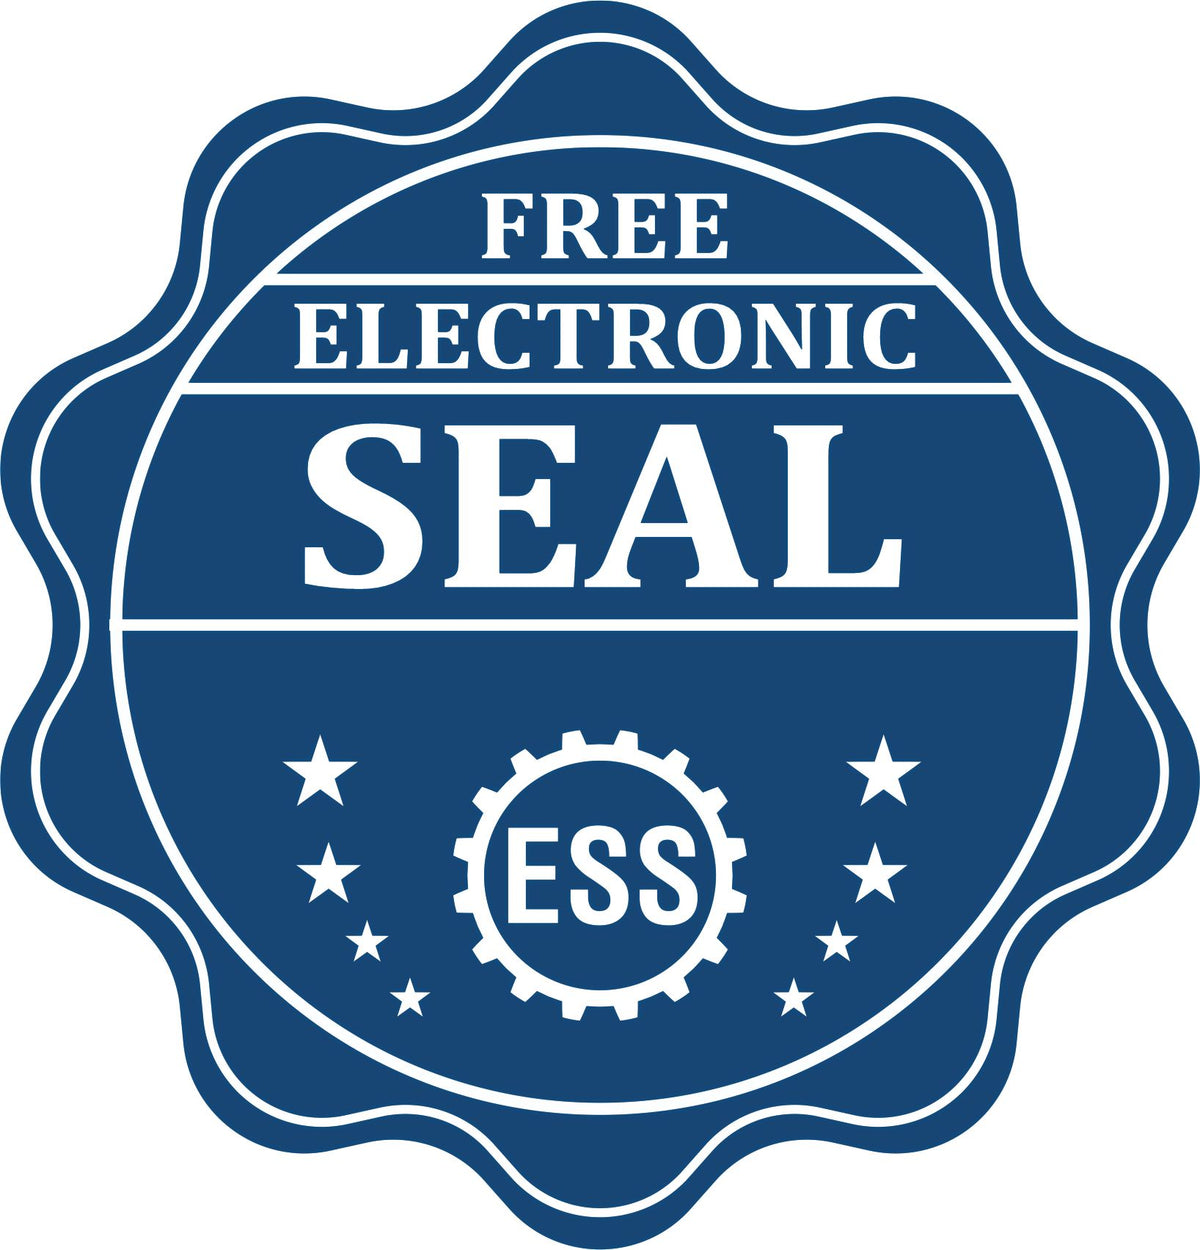 A badge showing a free electronic seal for the Slim Pre-Inked Wyoming Professional Geologist Seal Stamp with stars and the ESS gear on the emblem.